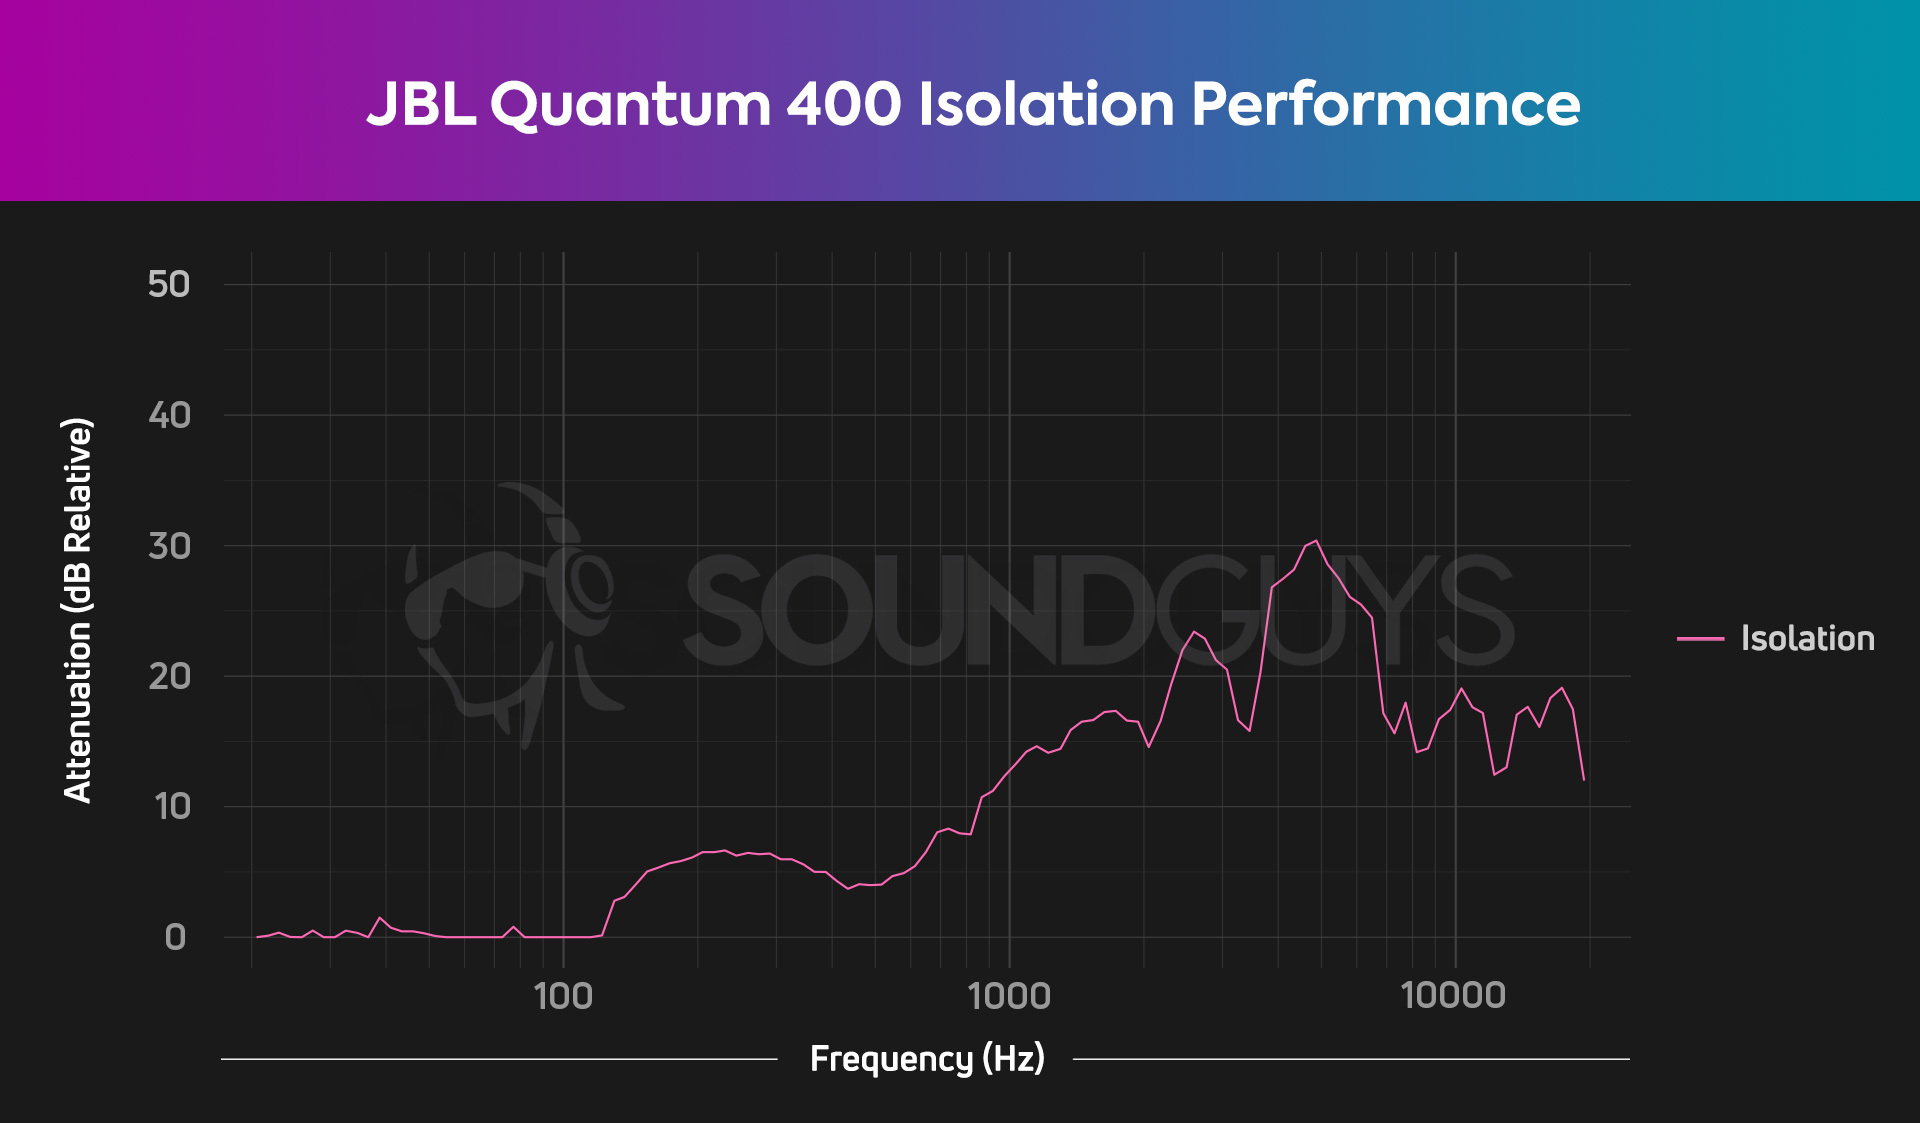 The isolation chart for the JBL Quantum 400.